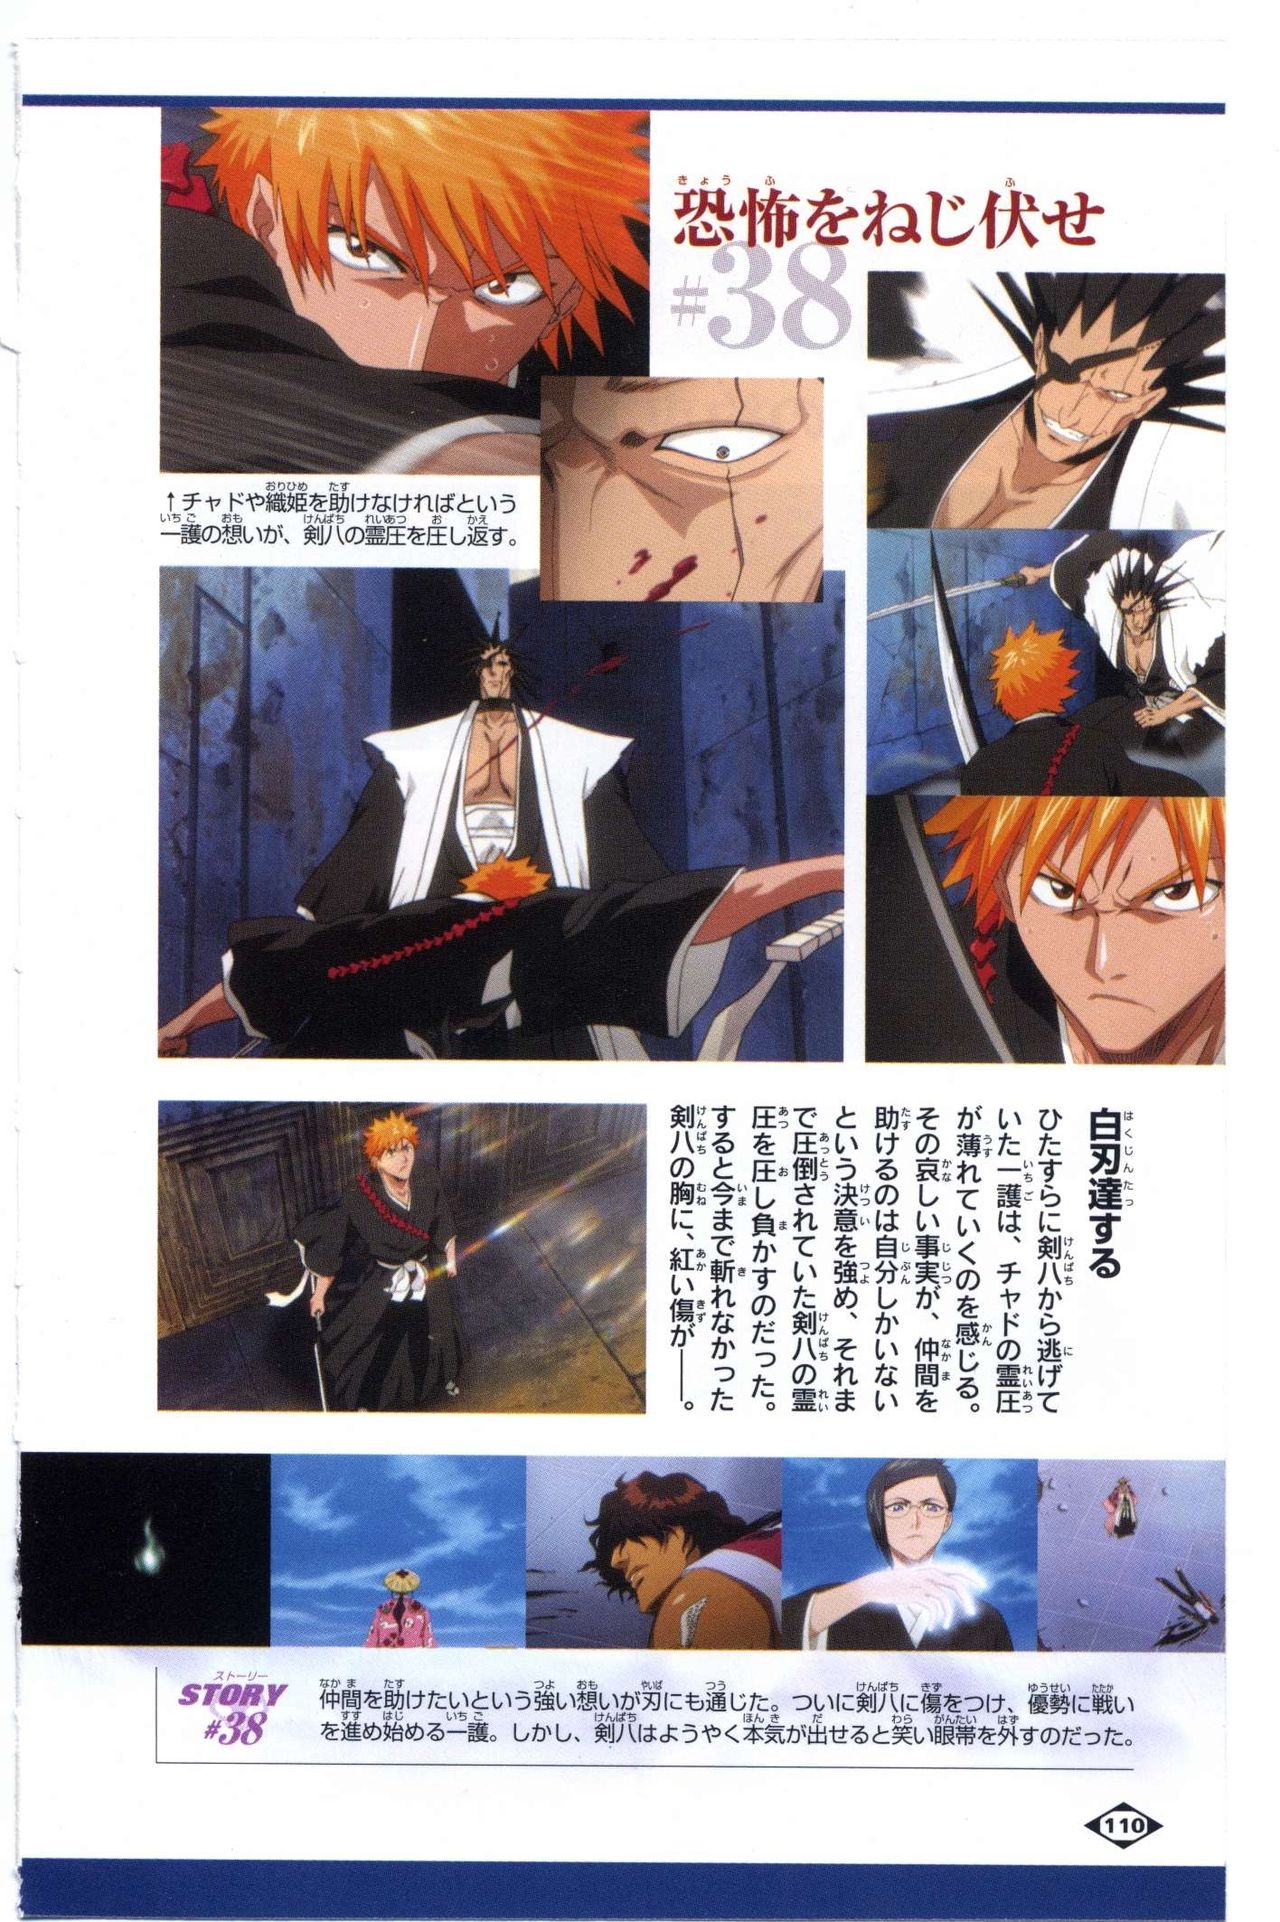 Bleach: Official Animation Book VIBEs 110